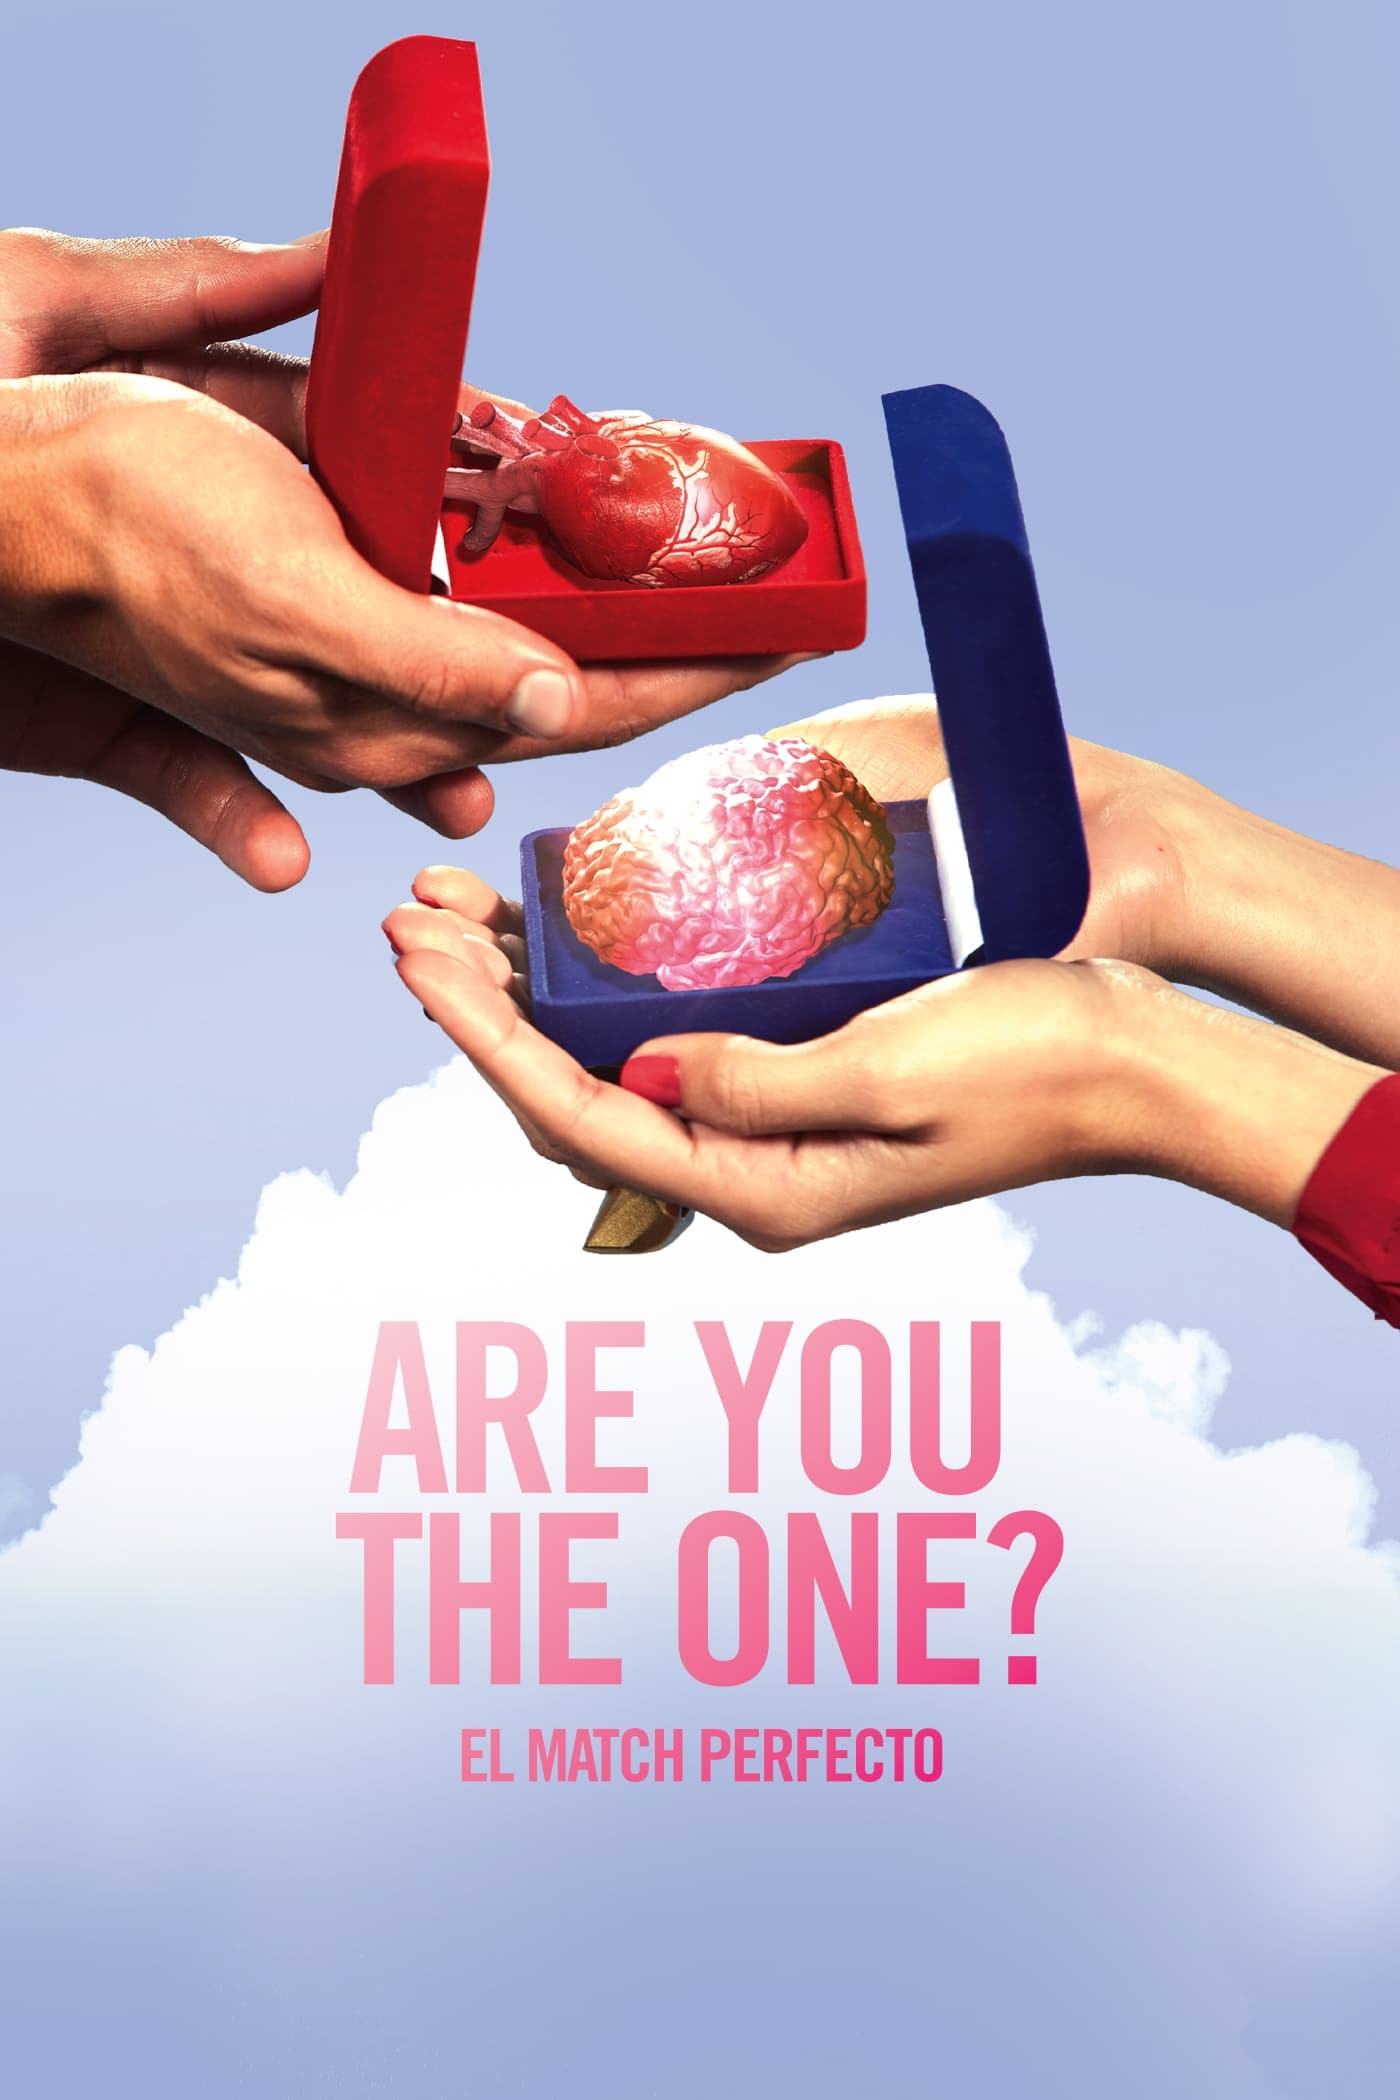 Are You The One? El Match Perfecto